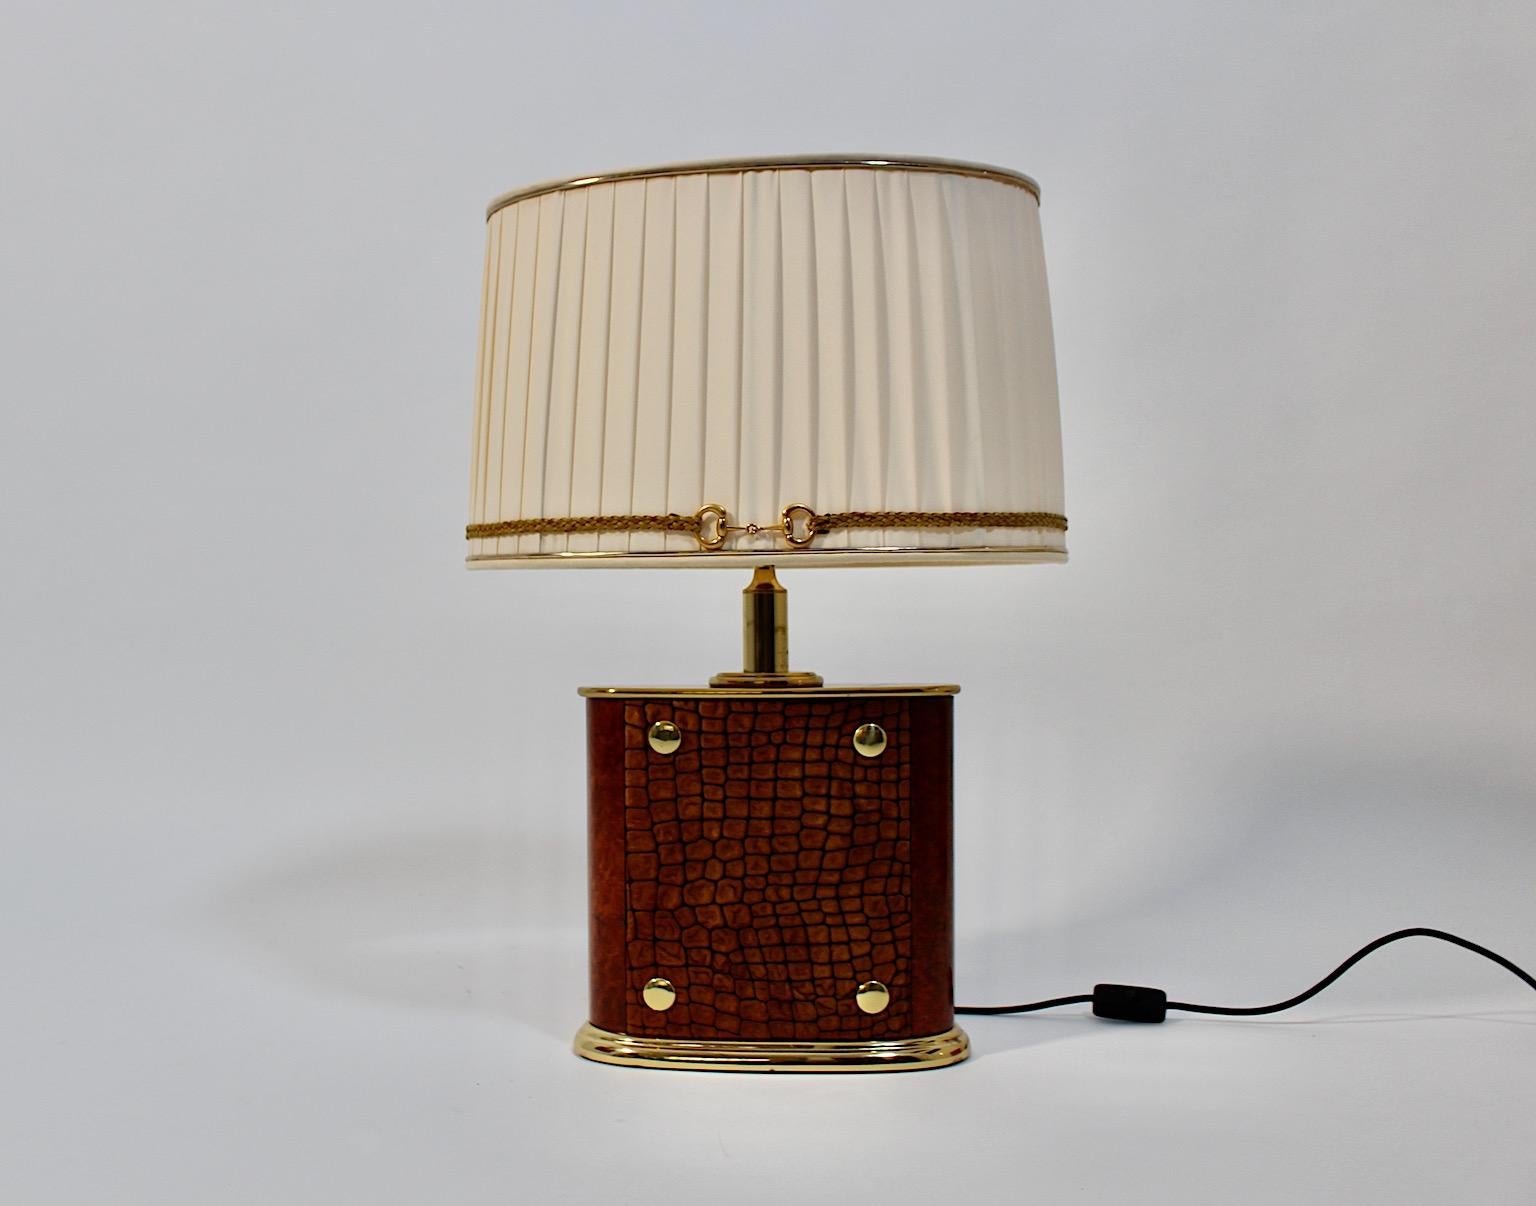 Mid Century Modern vintage table lamp from brass and brown suede and plastic with a new handmade lamp shade in its original form by Paolo Gucci for 
Form Italia 1960s Italy.
An extraordinary and sophisticated table lamp designed by Paolo Gucci 1960s